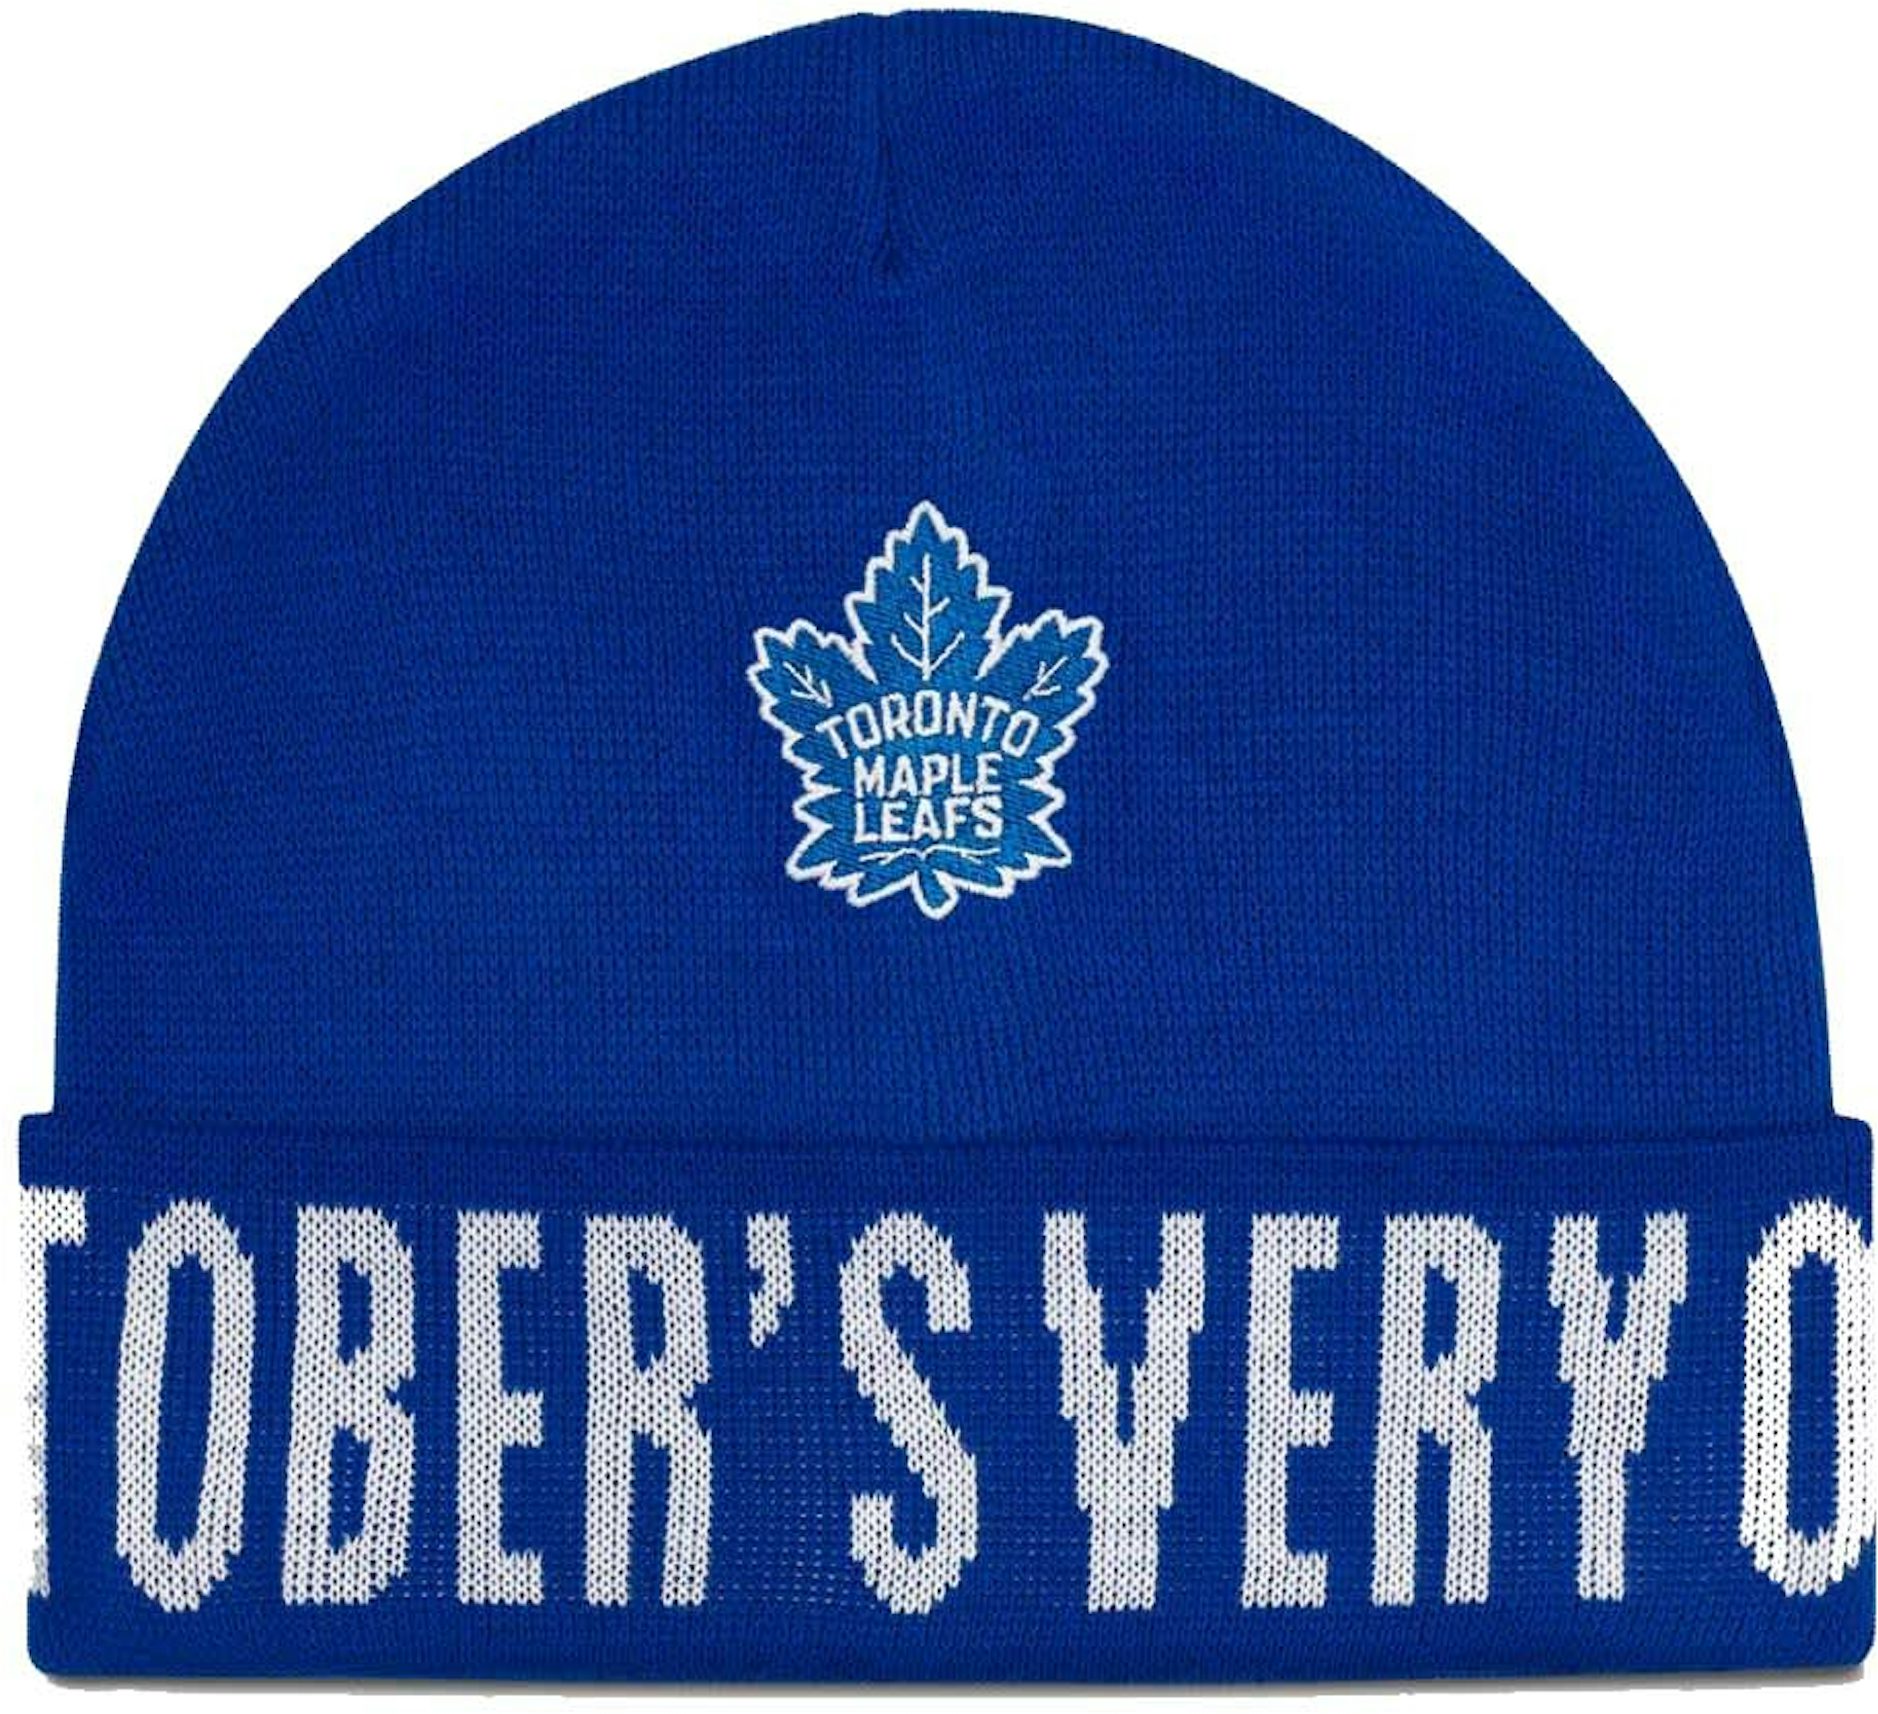 New Toronto Maple Leafs youth One Size Fits All Reebok Hat